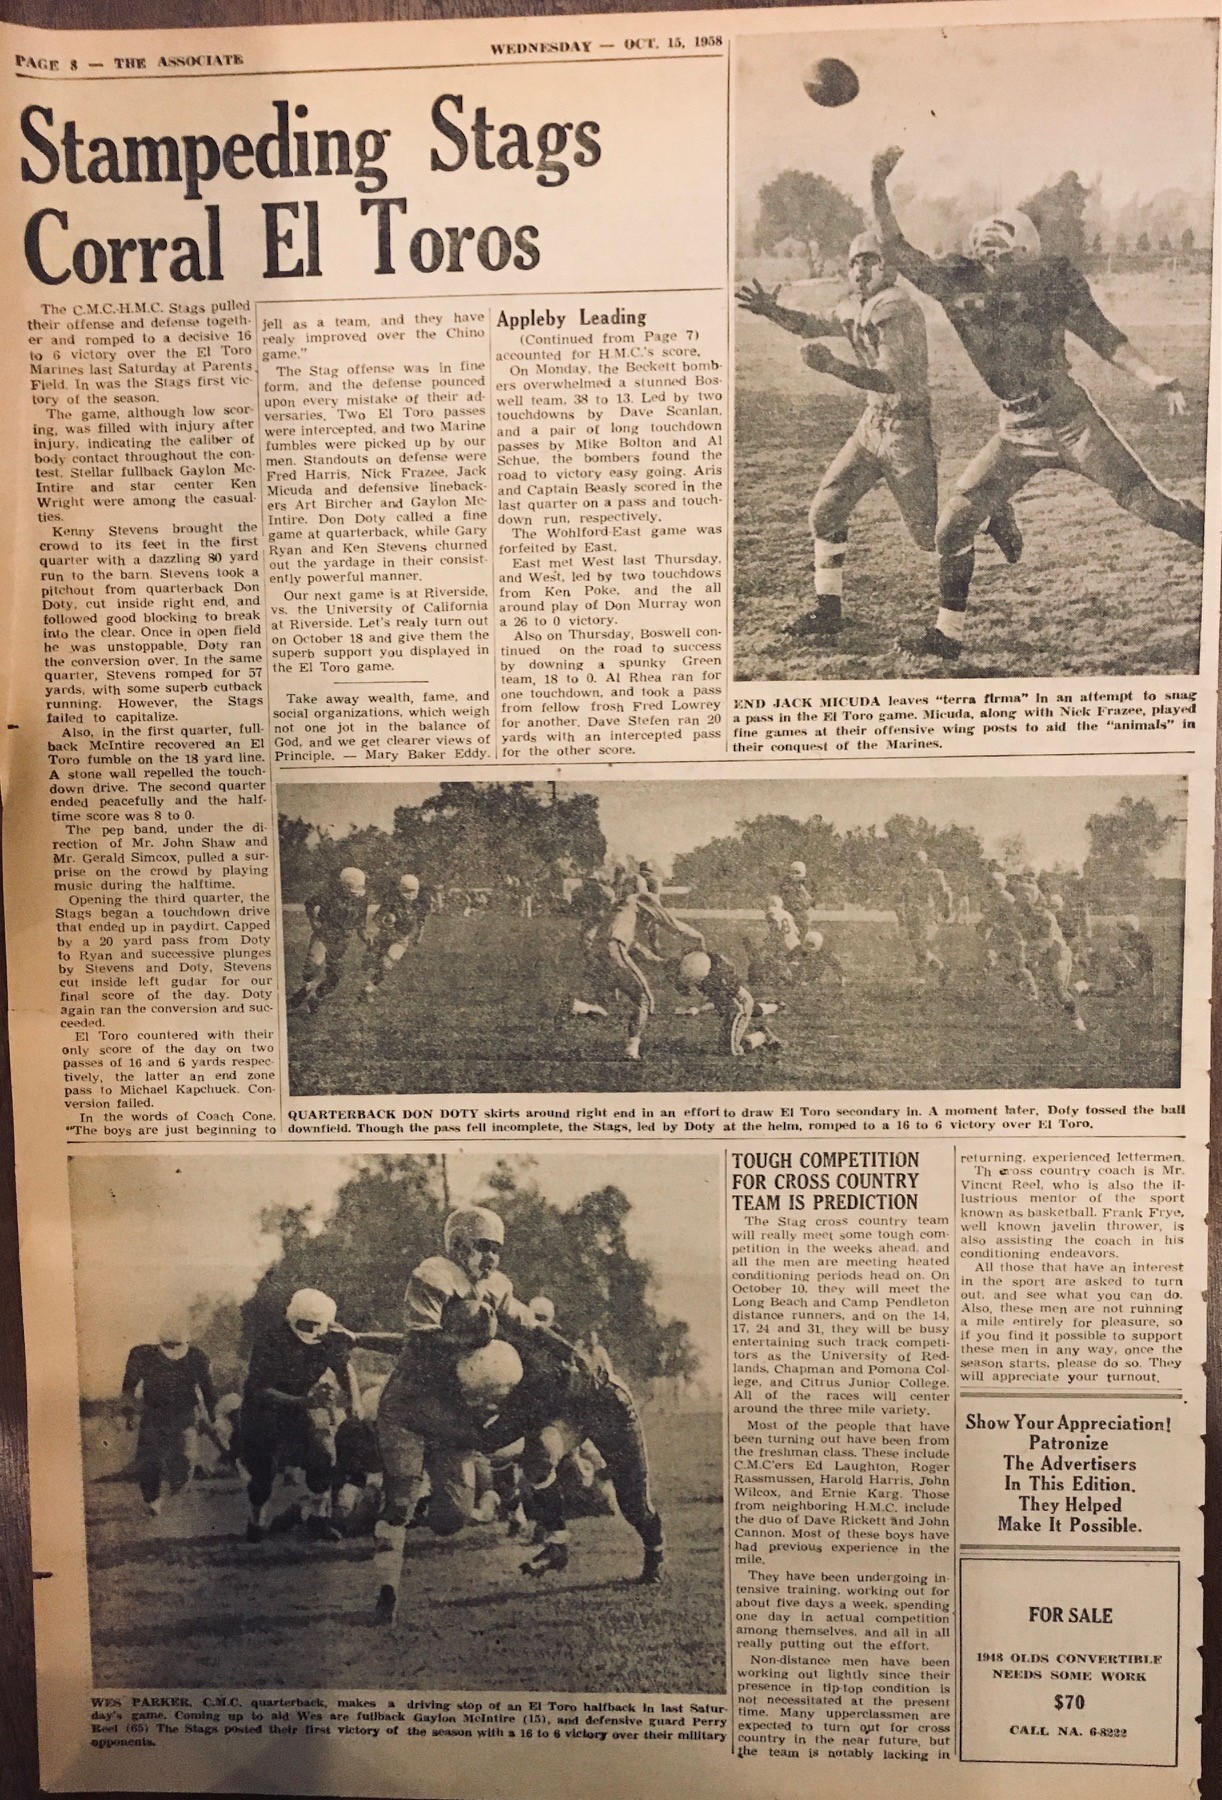 Article from first Claremont-Mudd win